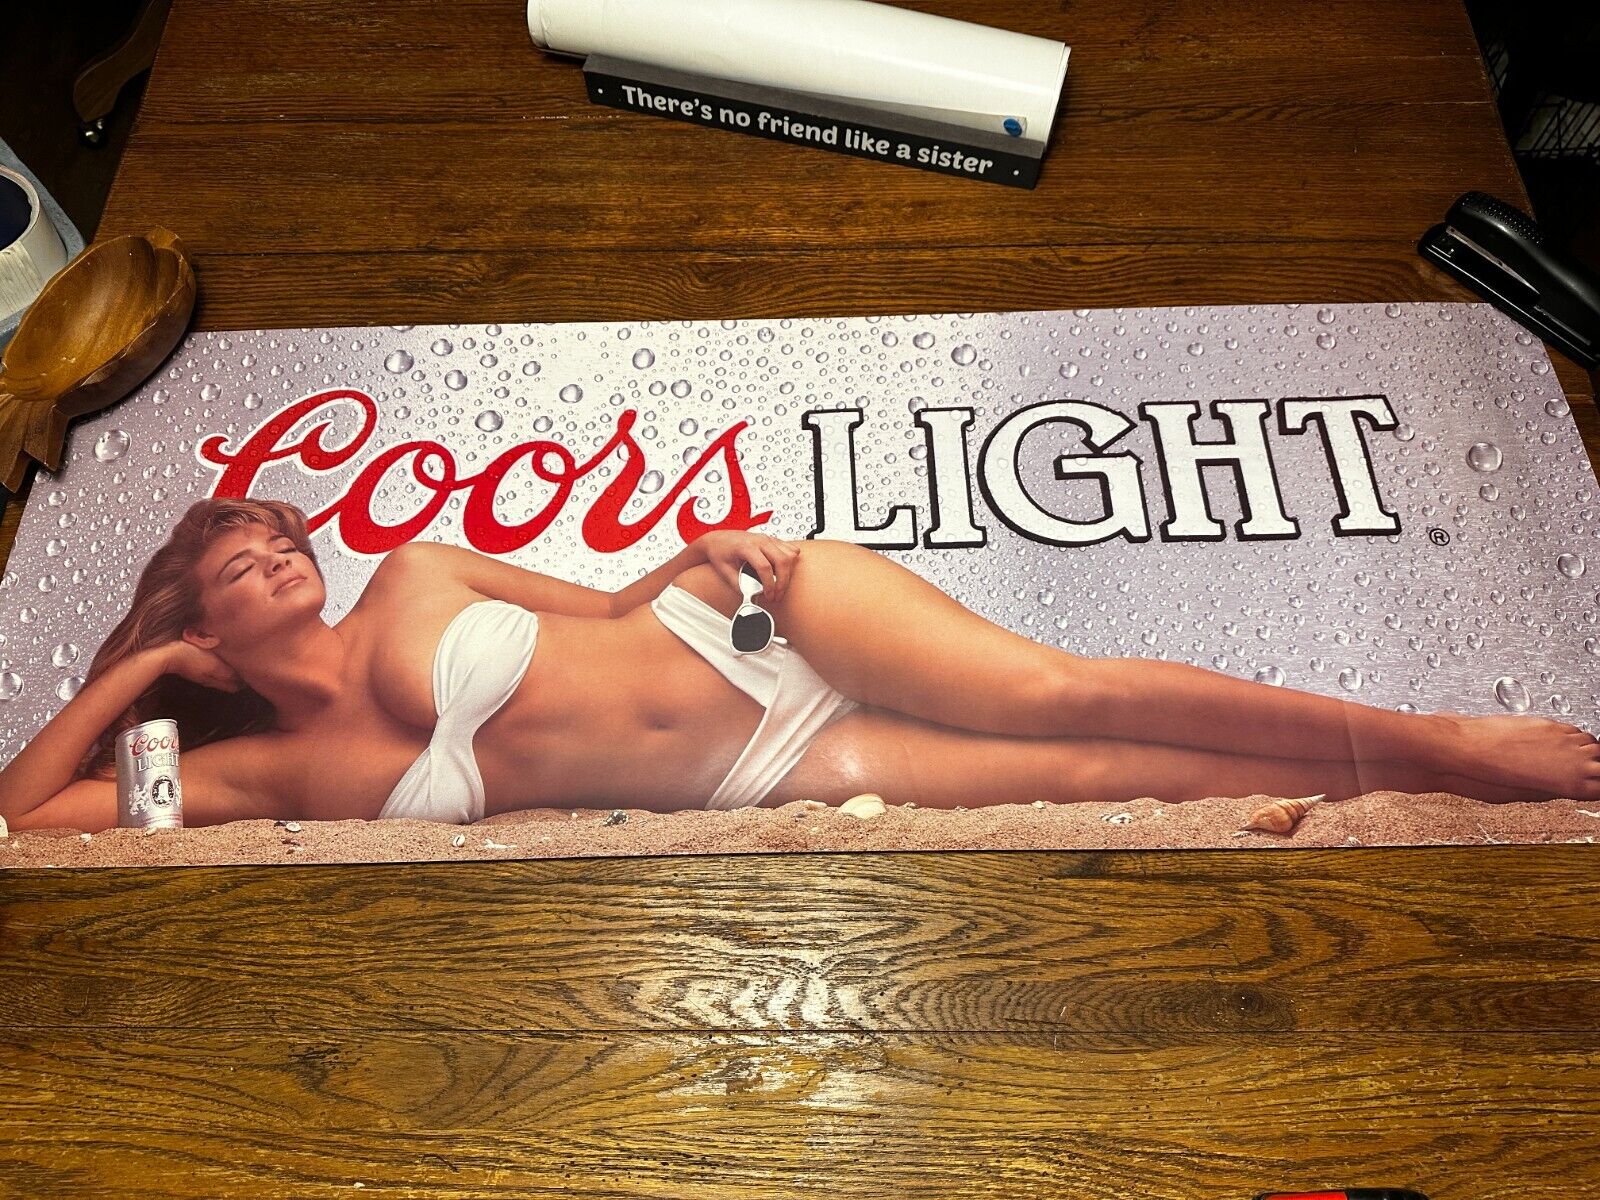 VINTAGE 1988 Adolph COORS LIGHT Beer Poster SEXY Bikini model 17X46